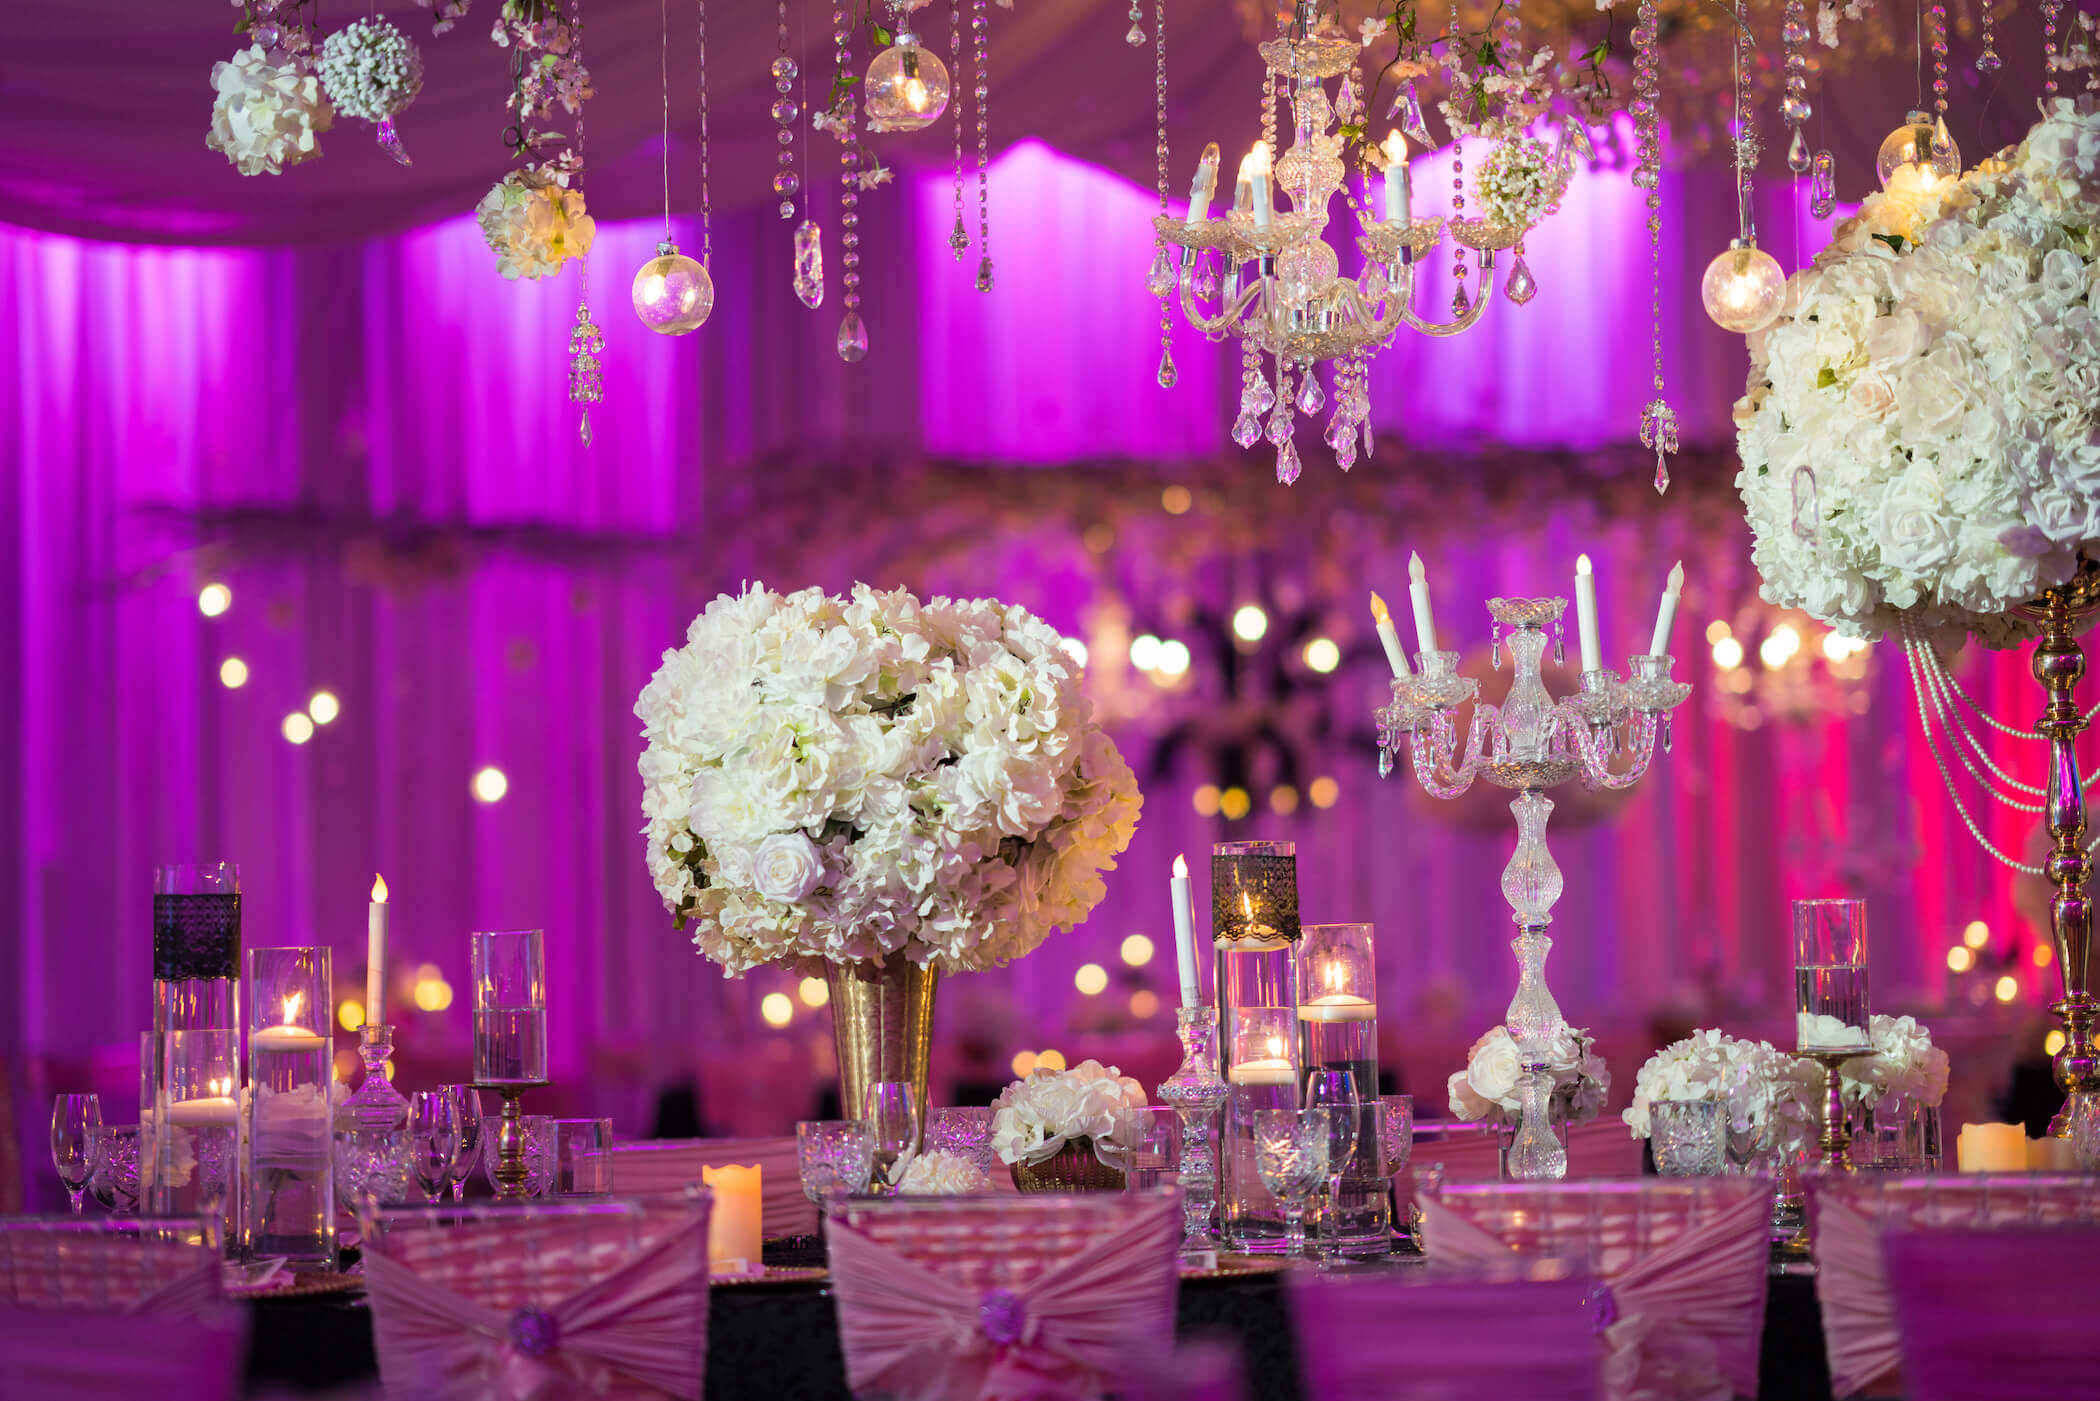 5 Things to Look for in a Quinceañera Venue